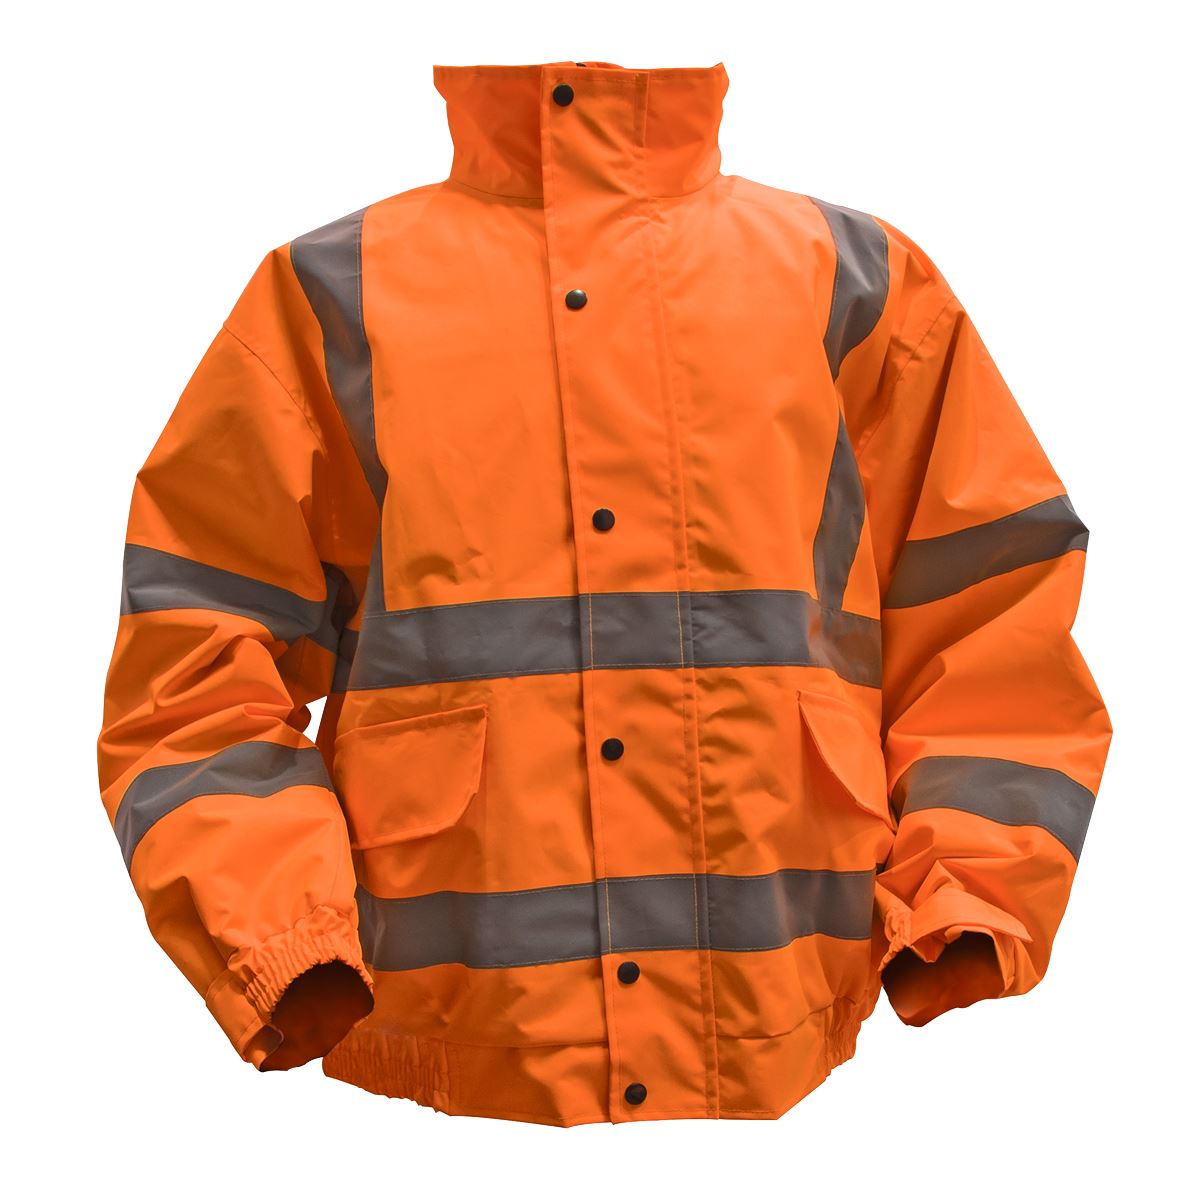 Worksafe by Sealey Hi-Vis Orange Jacket with Quilted Lining & Elasticated Waist - XX-Large